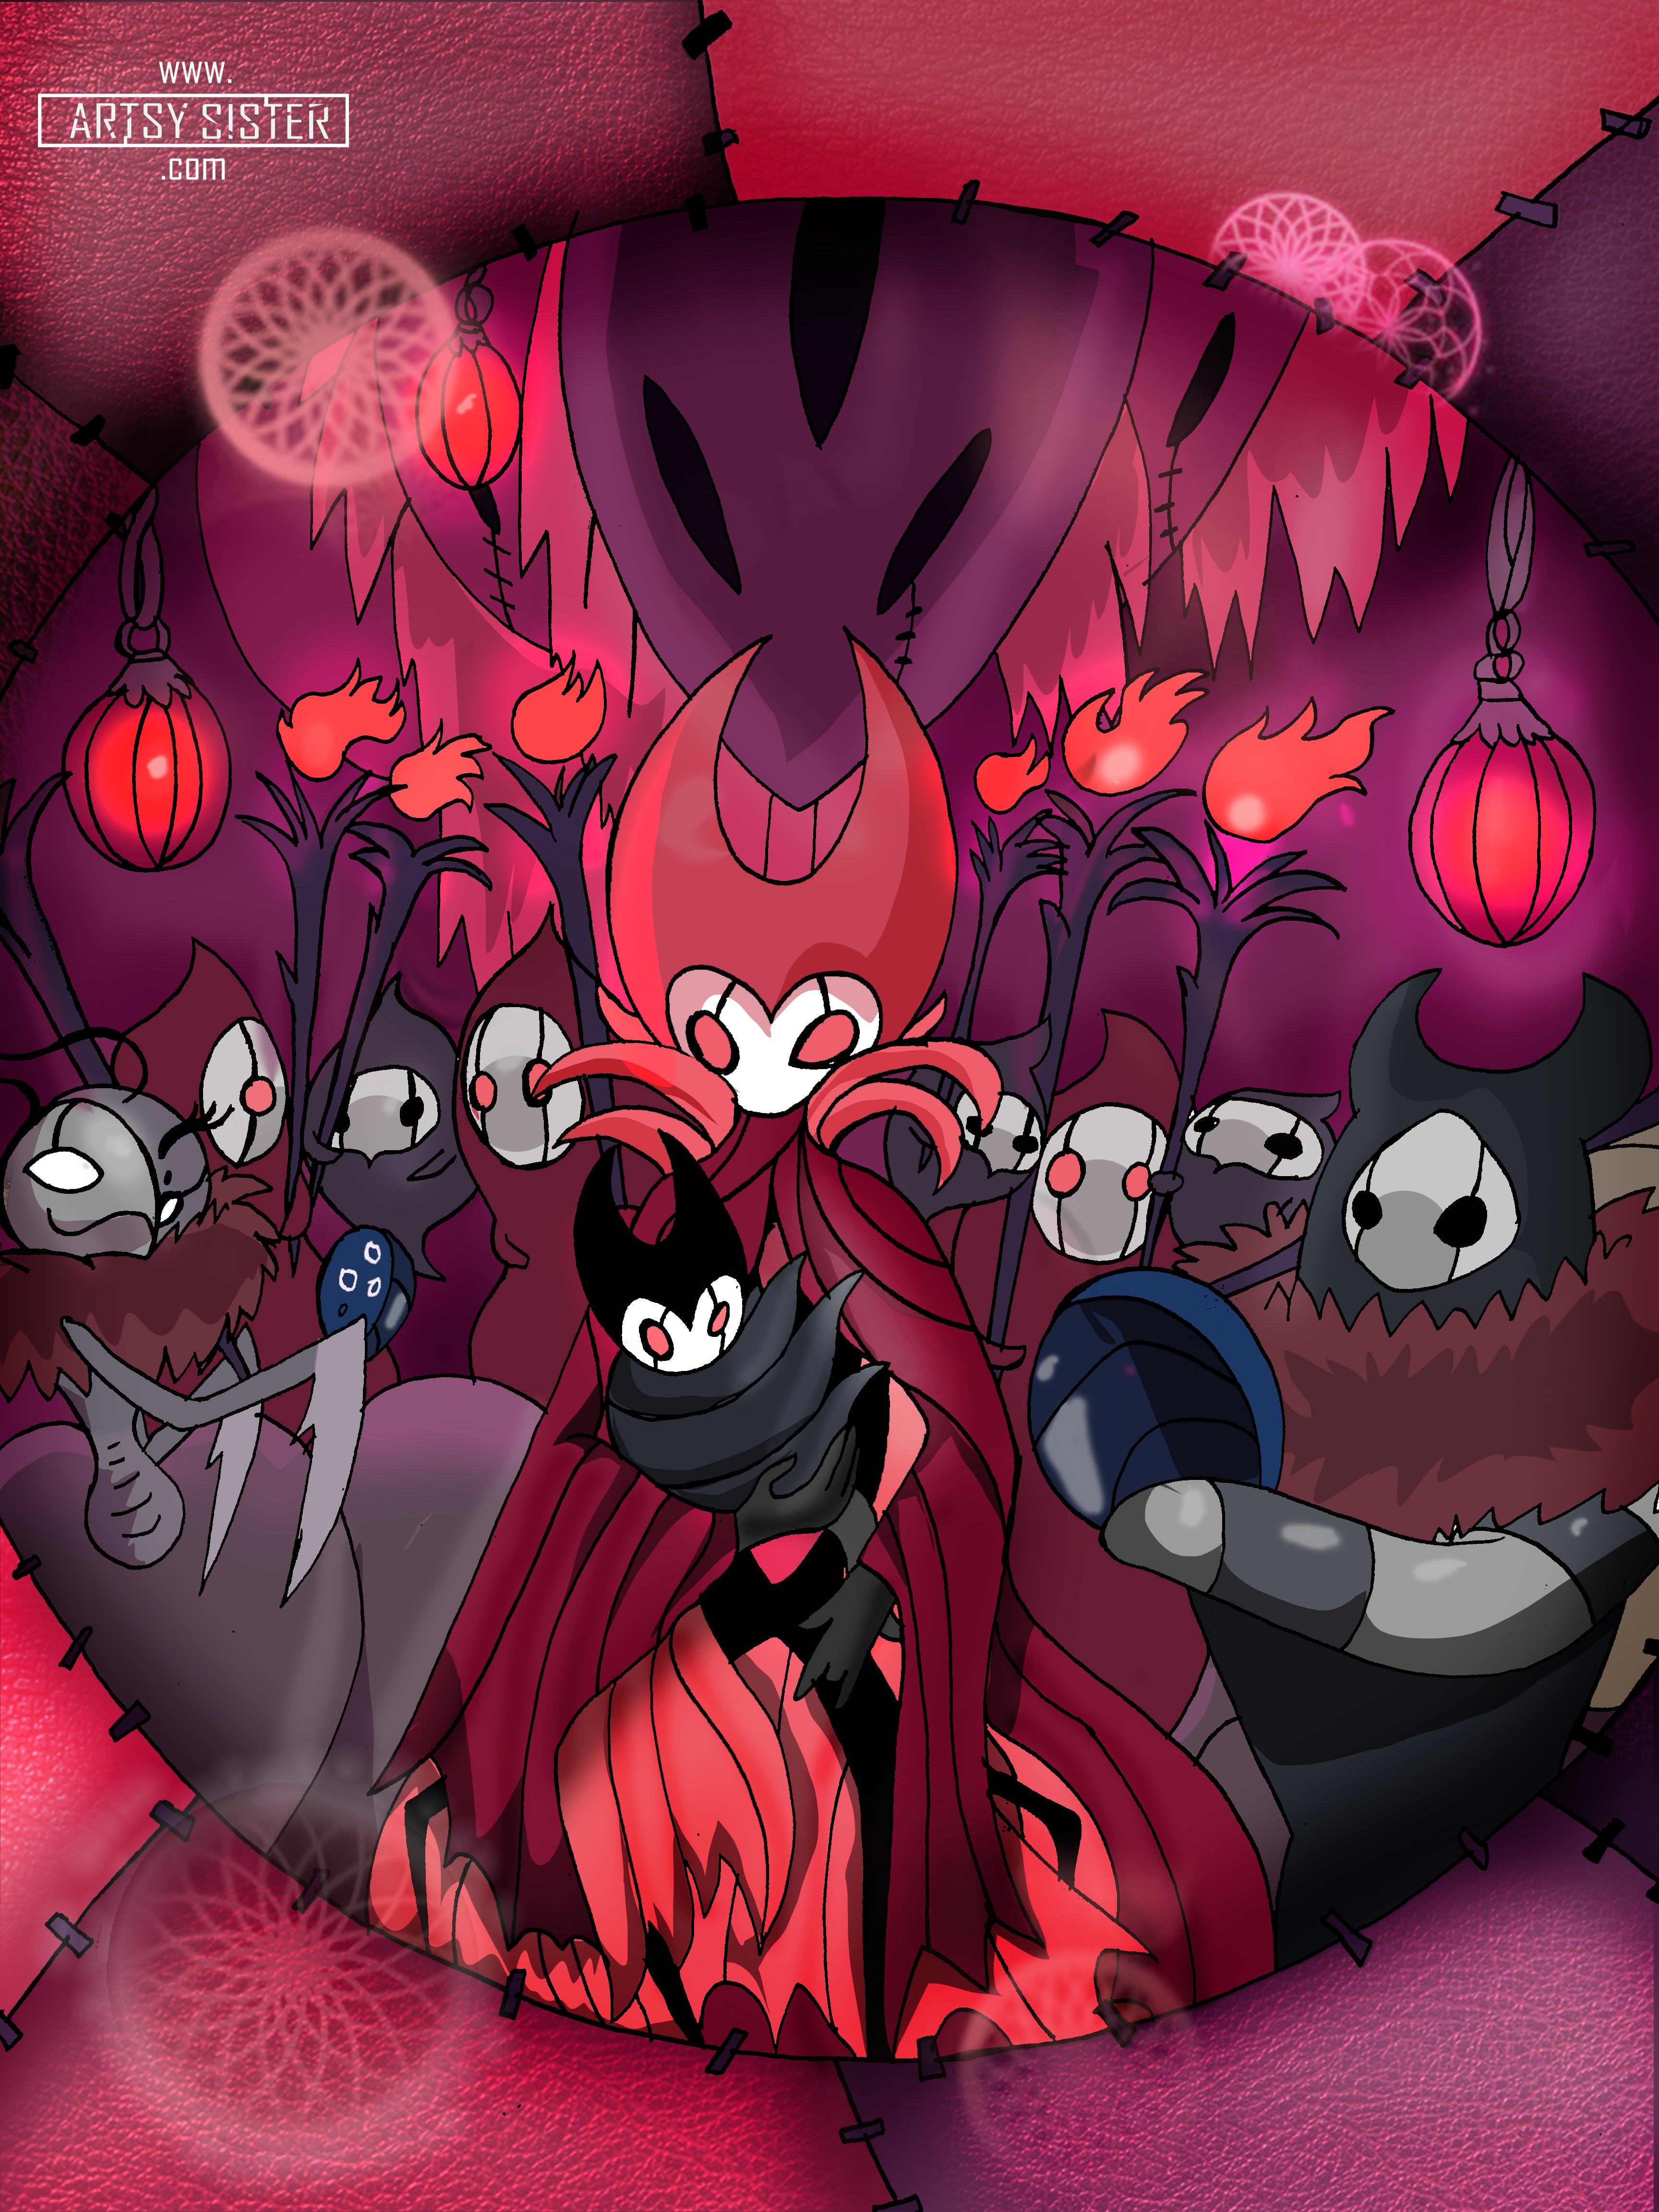 artsy sister, hollow knight parody, hollow knight grimm troupe